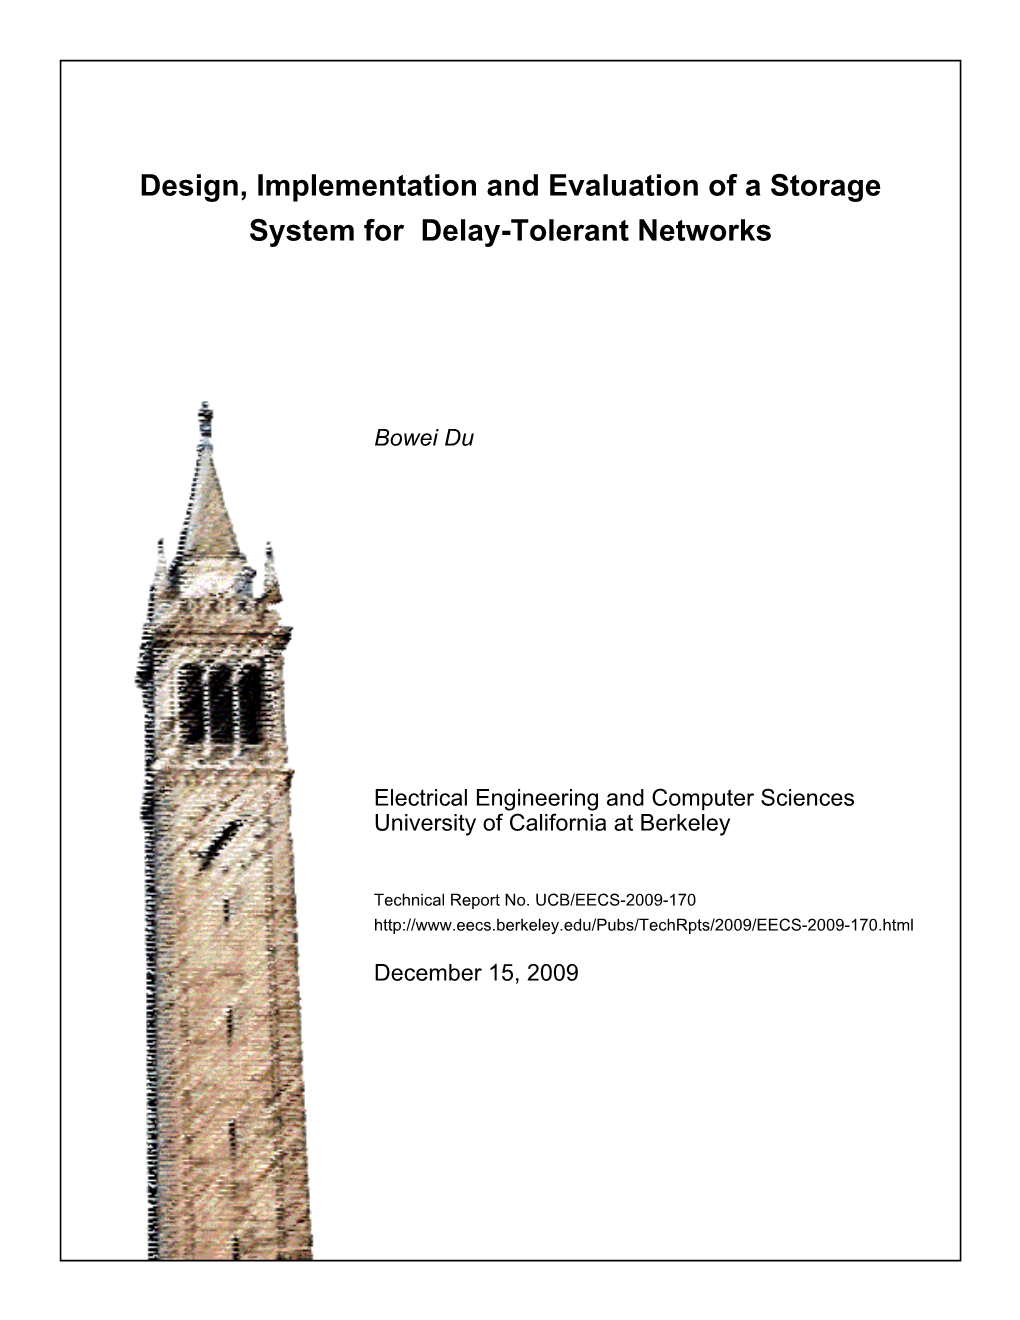 Design, Implementation and Evaluation of a Storage System for Delay-Tolerant Networks